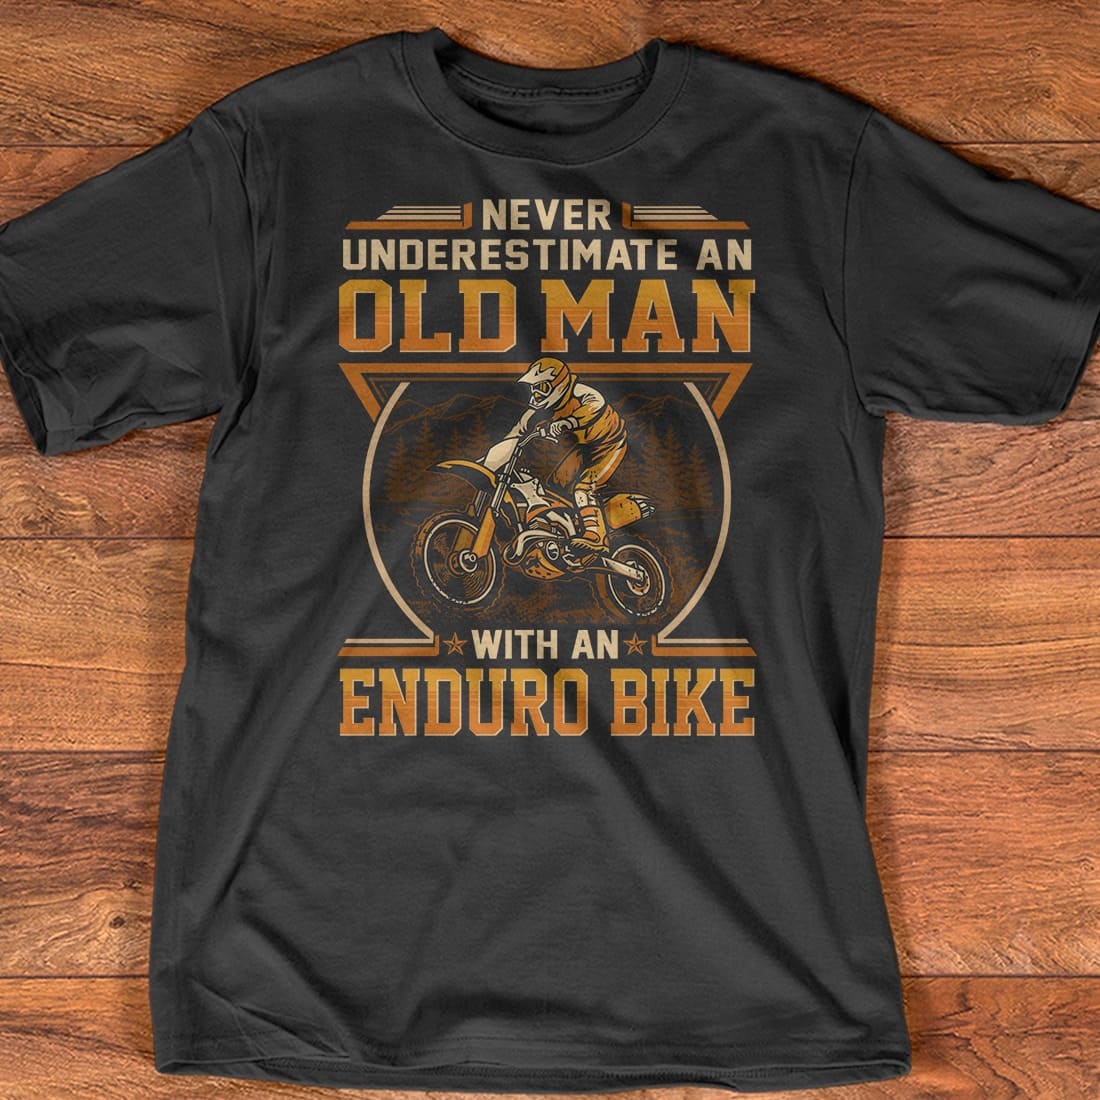 Never underestimate an old man with an enduro bike - Old man bikers